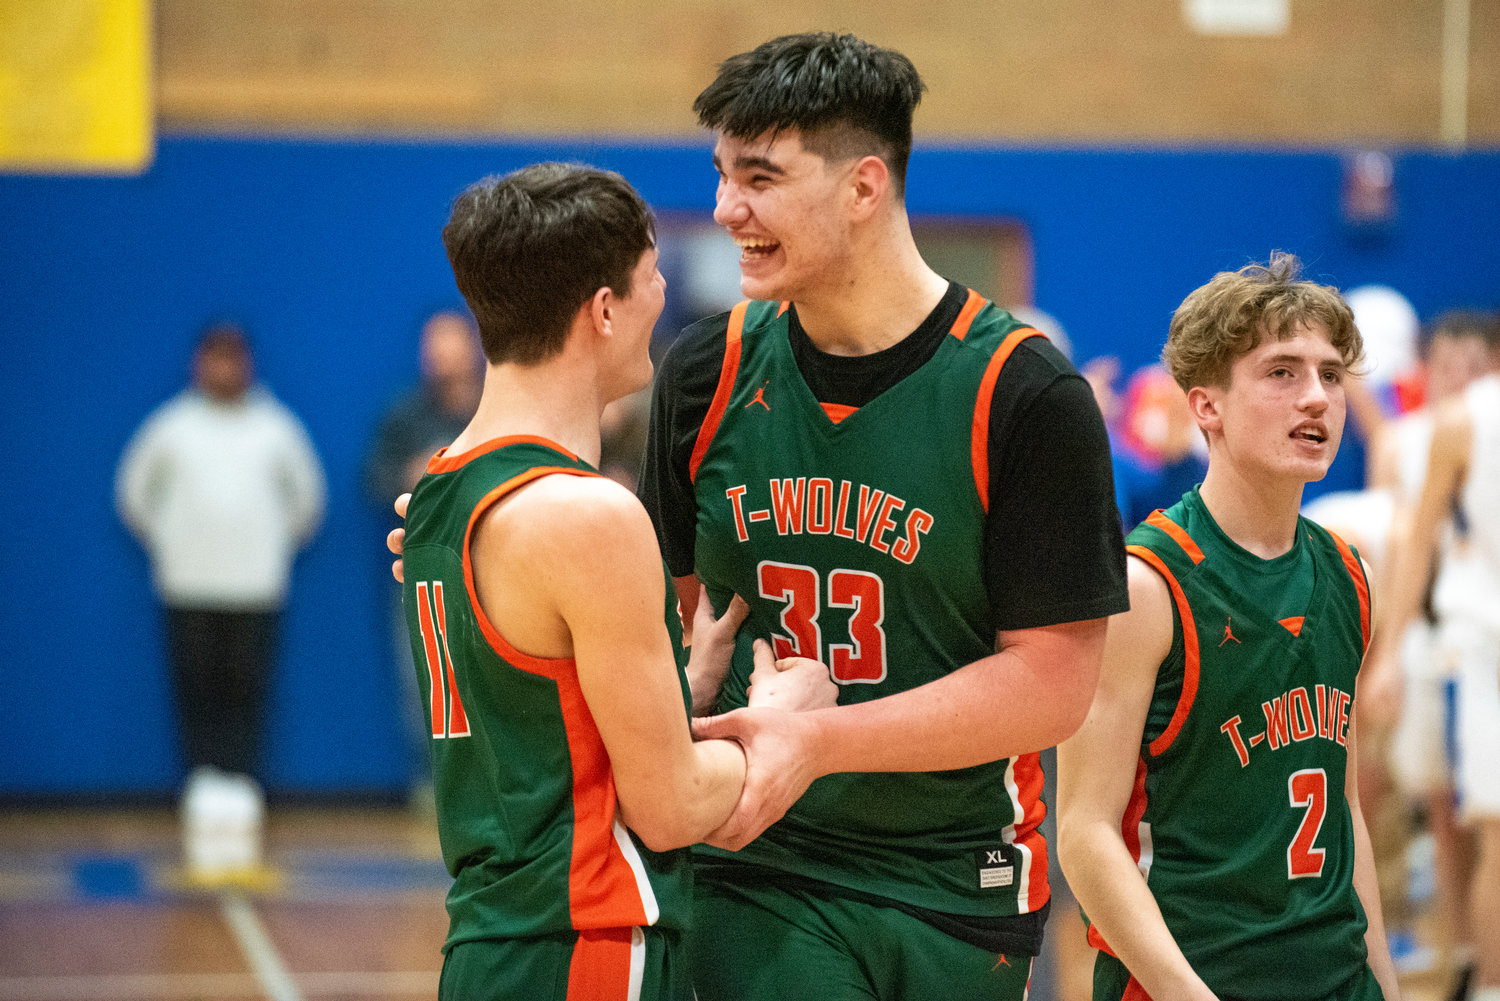 Morton-White Pass' Josh Salguero (33), Hunter Hazen (11) and Judah Kelly (2) celebrate after the Timberwolves defeat Adna in the distrist semifinals Wednesday at Kelso High School.